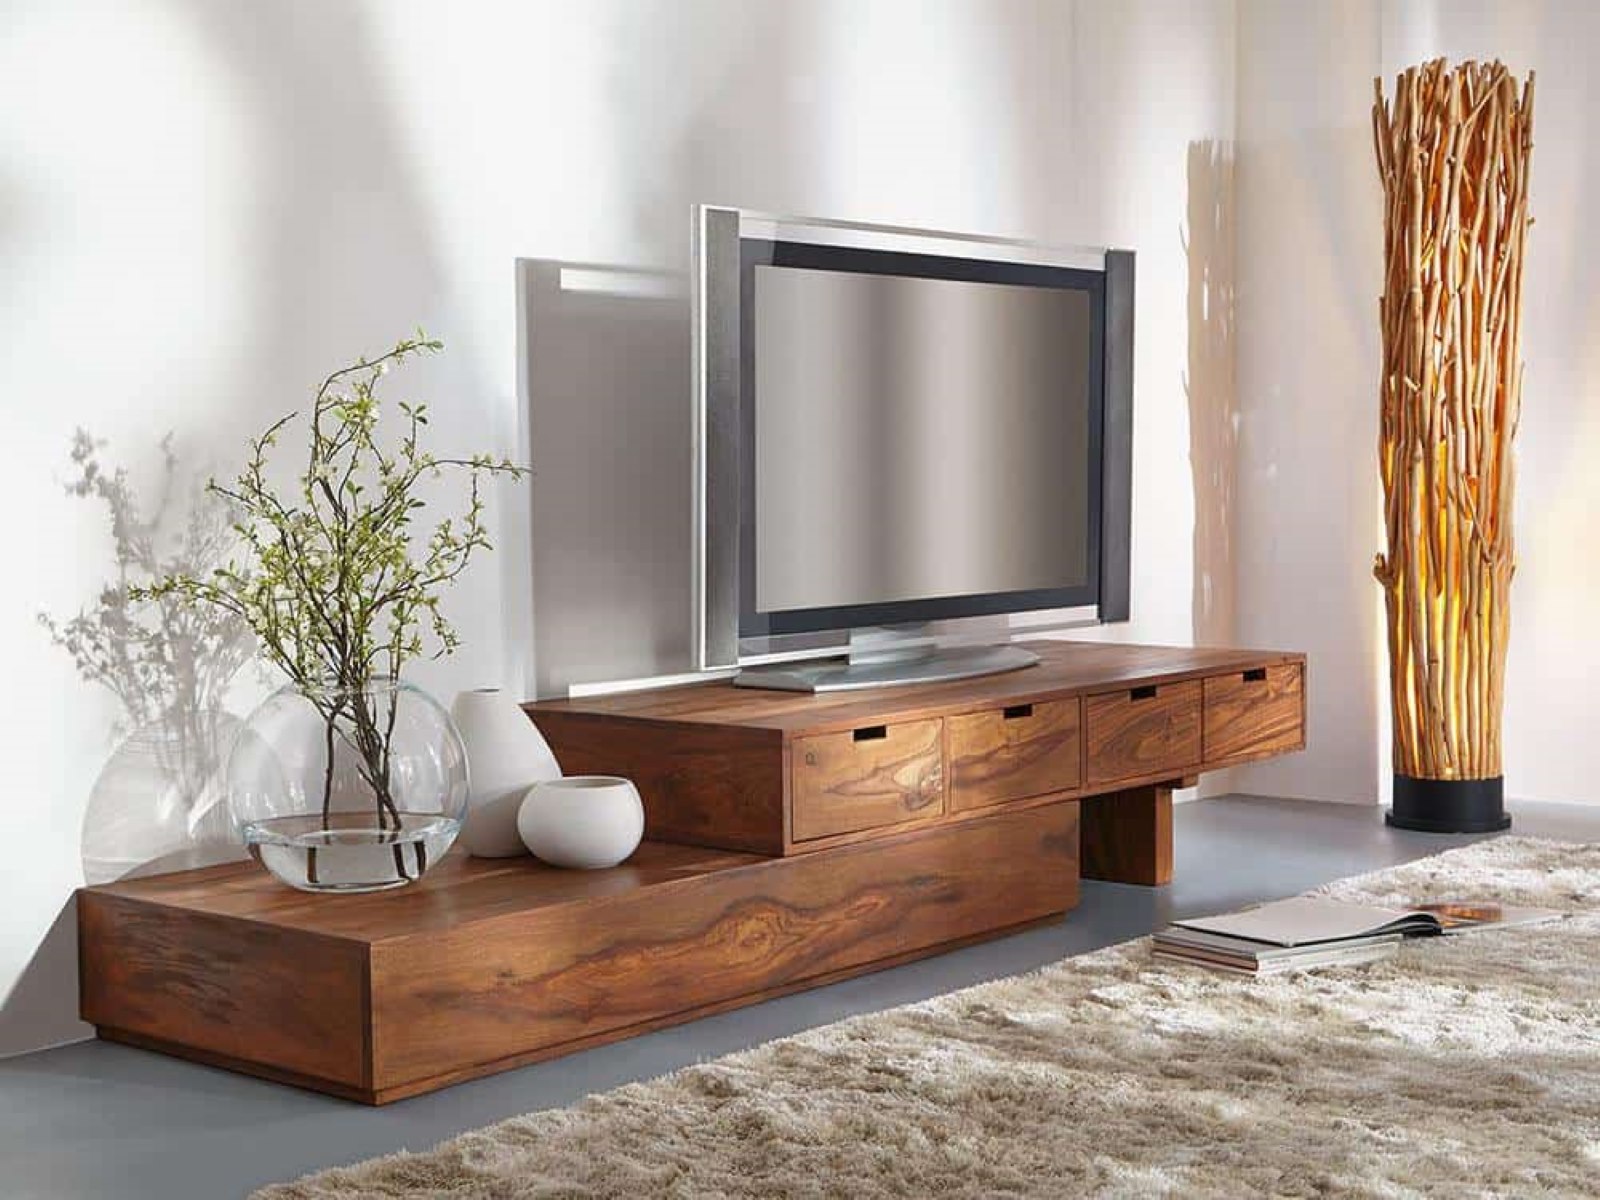 What Can I Use Instead Of A TV Stand?